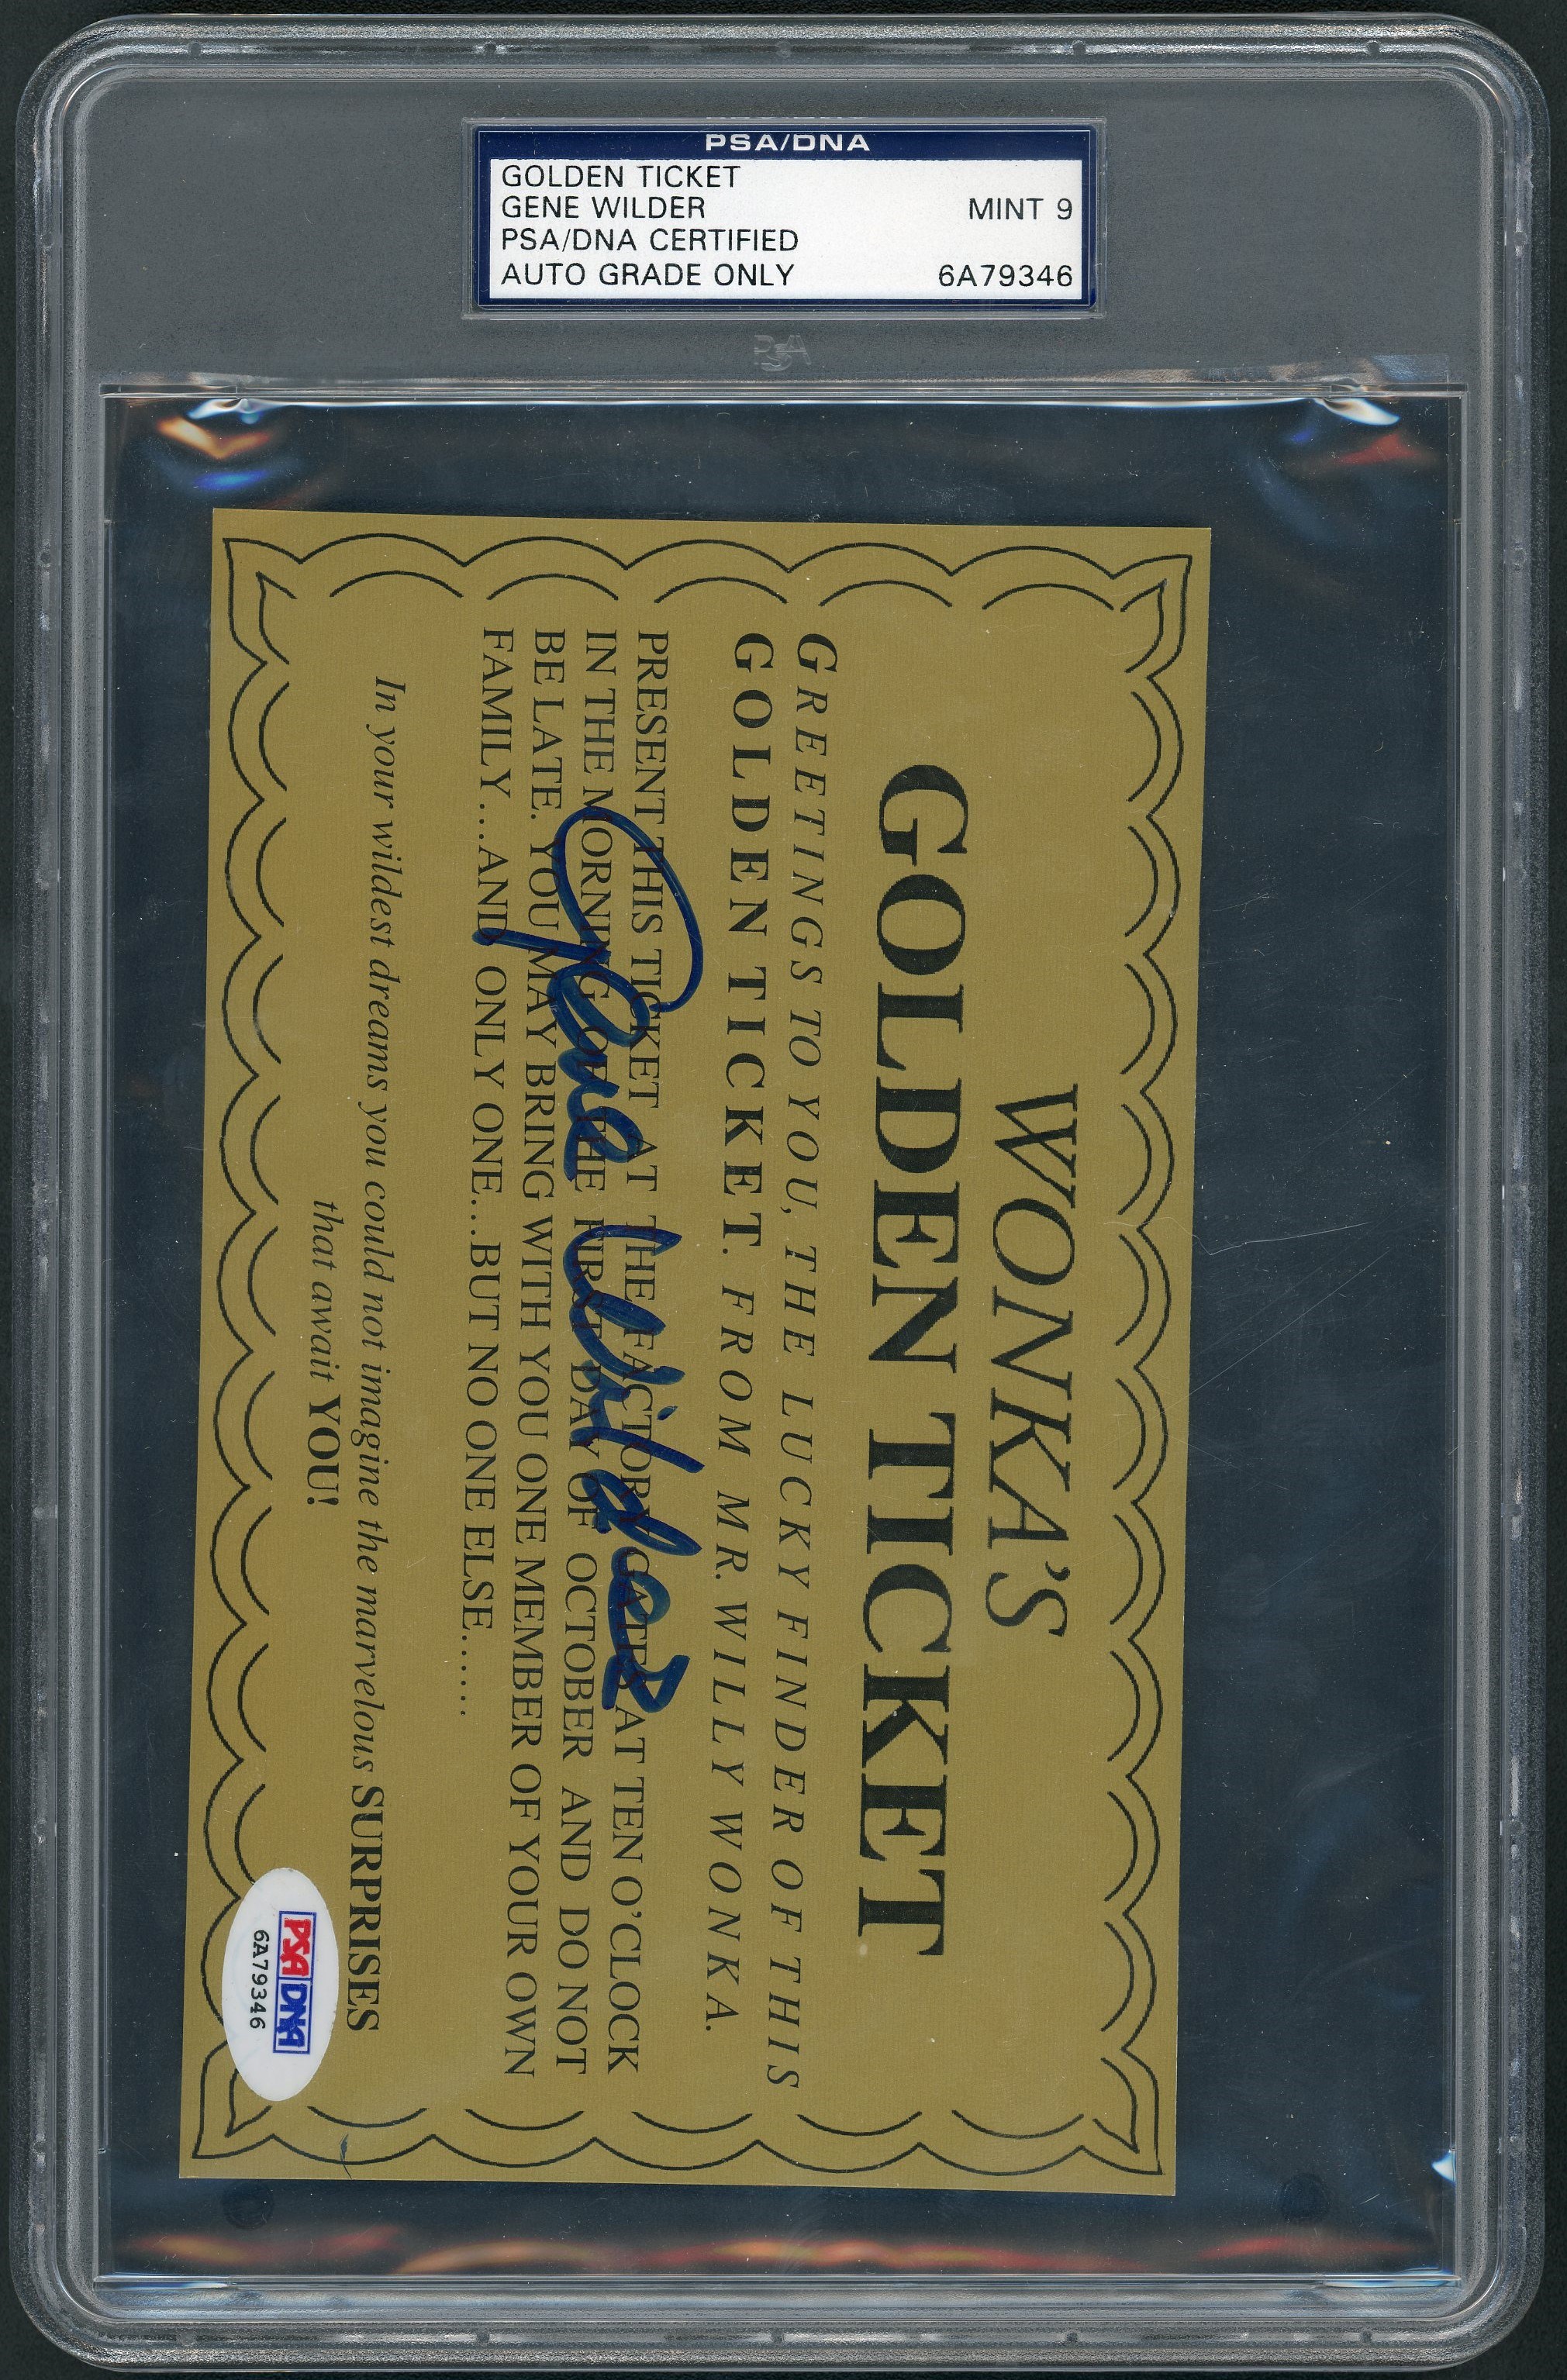 Rock And Pop Culture - Willy Wonka "Golden Ticket" Signed by Gene Wilder - PSA/DNA MINT 9